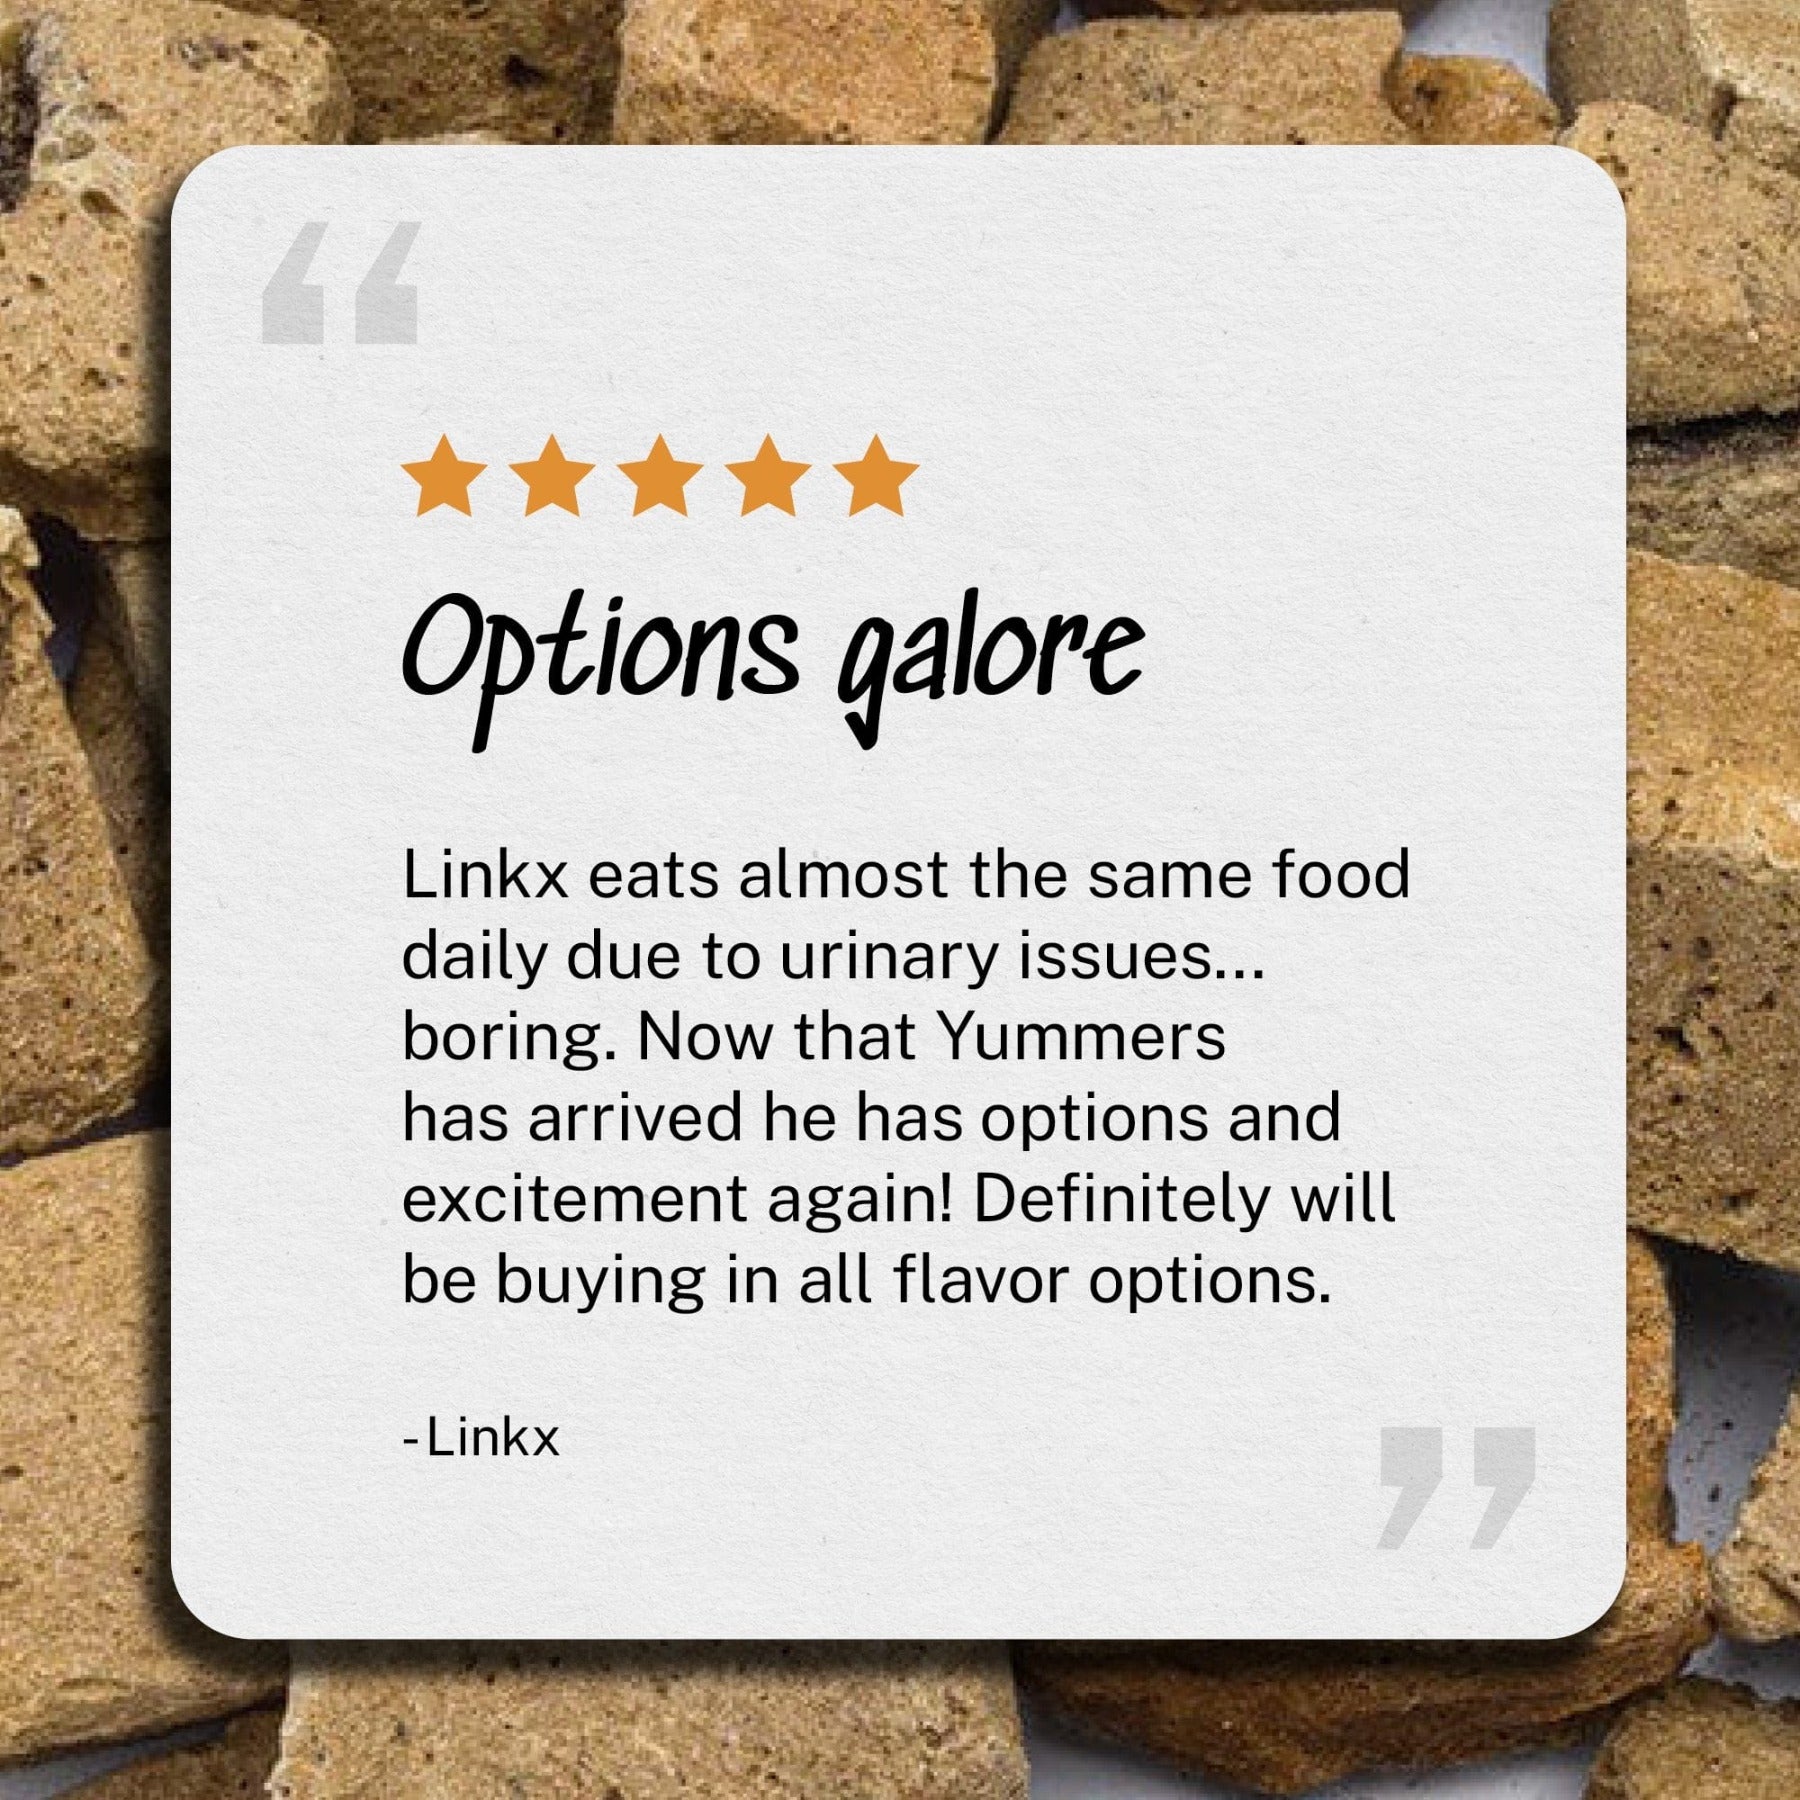 Review: Options galore - Linkx eats almost the same food daily due to urinary issues...boring. Now that Yummers has arrived he has options and excitement again! Definitely will be buying in all flavor options. - Linkx